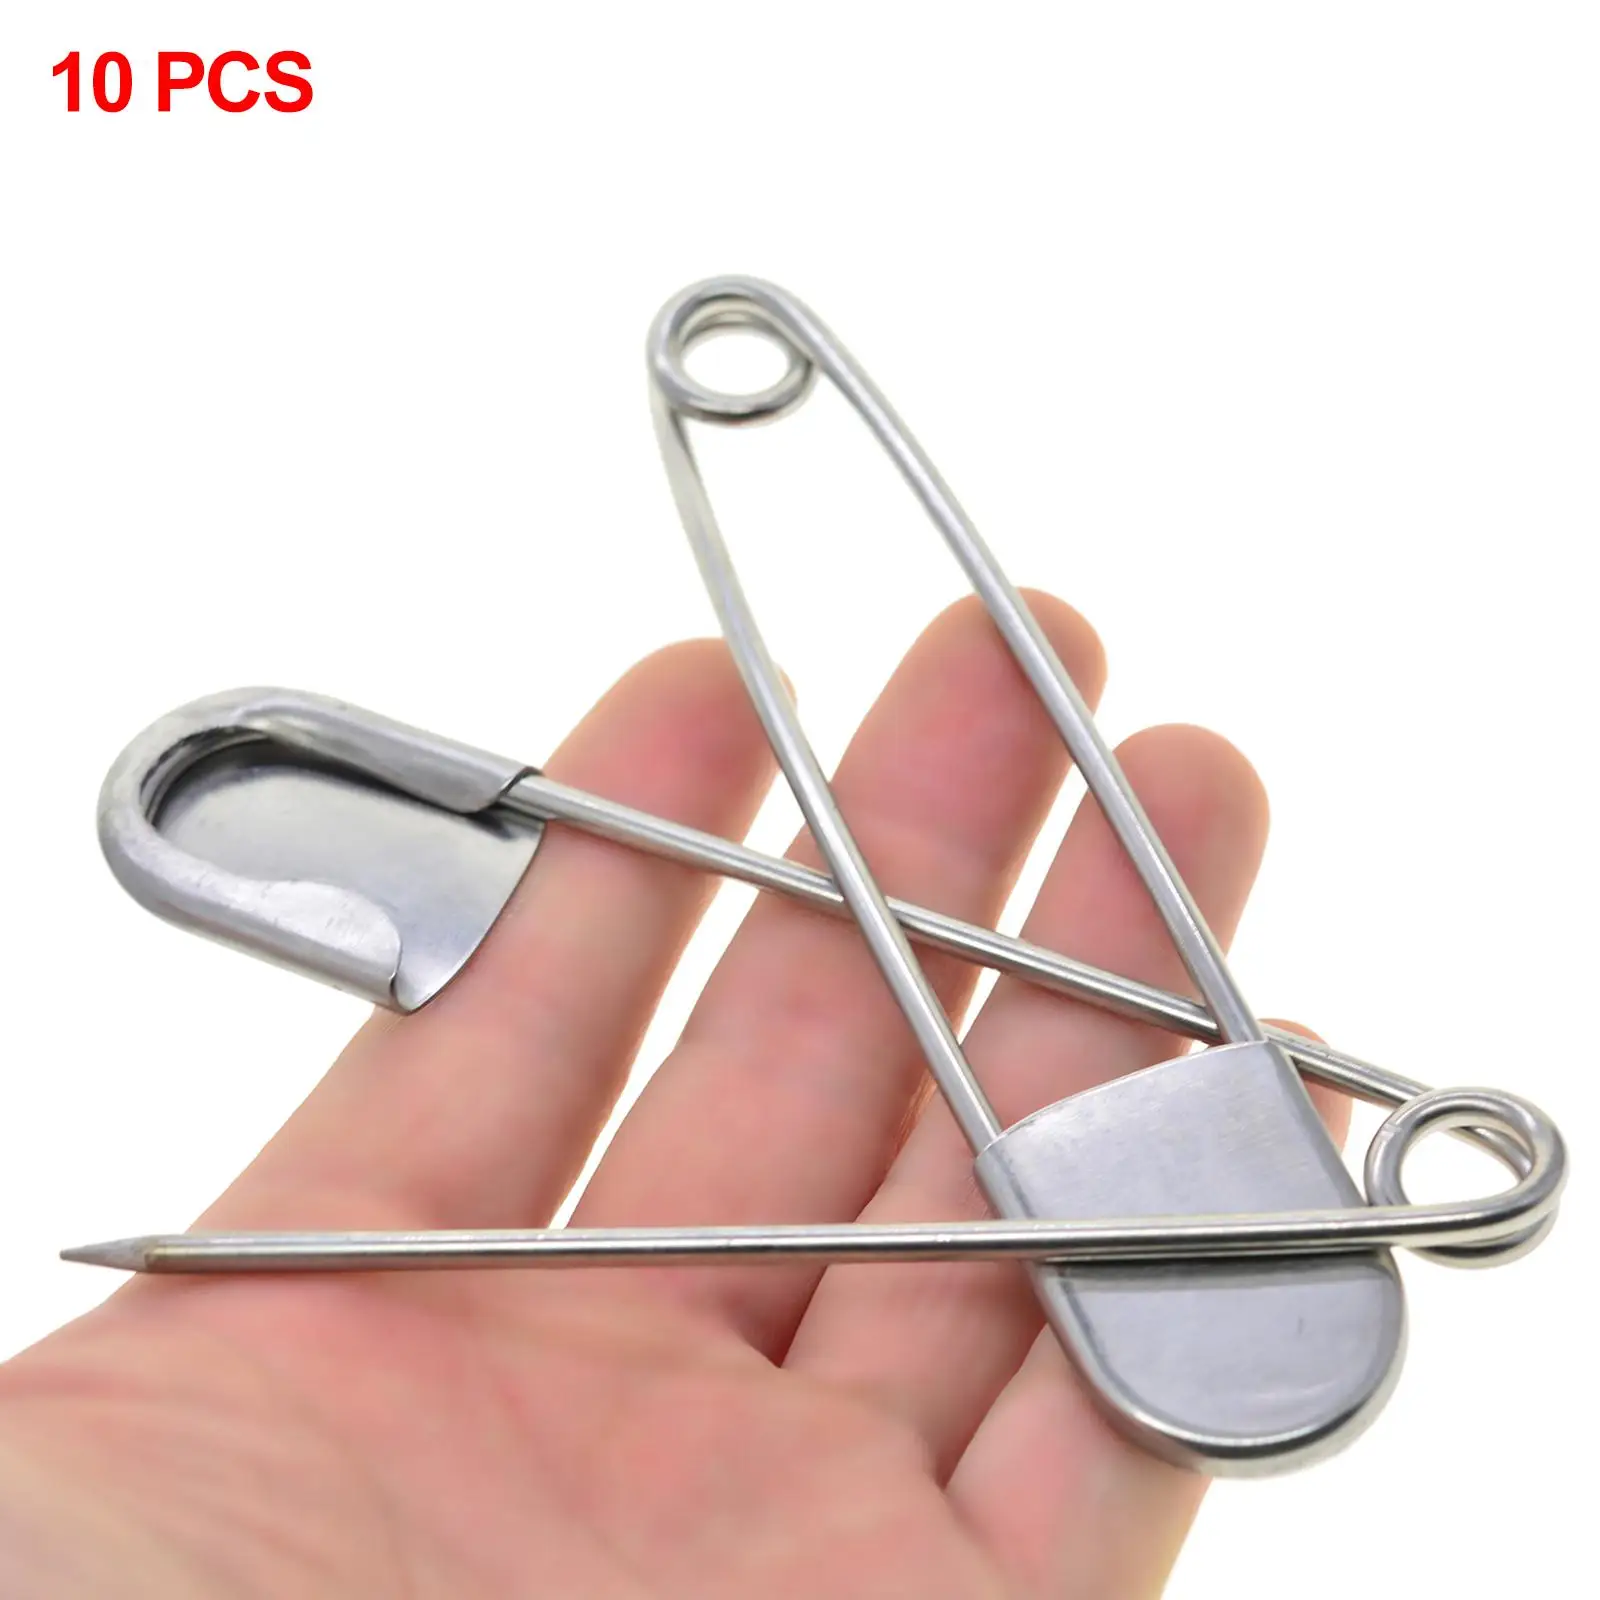 Safety Pins Large Heavy Duty Safety Pin Blanket Pins 3 inch Brooch Pin  Stainless Steel Wire Safety Pin Bulk Pins for Blankets - AliExpress